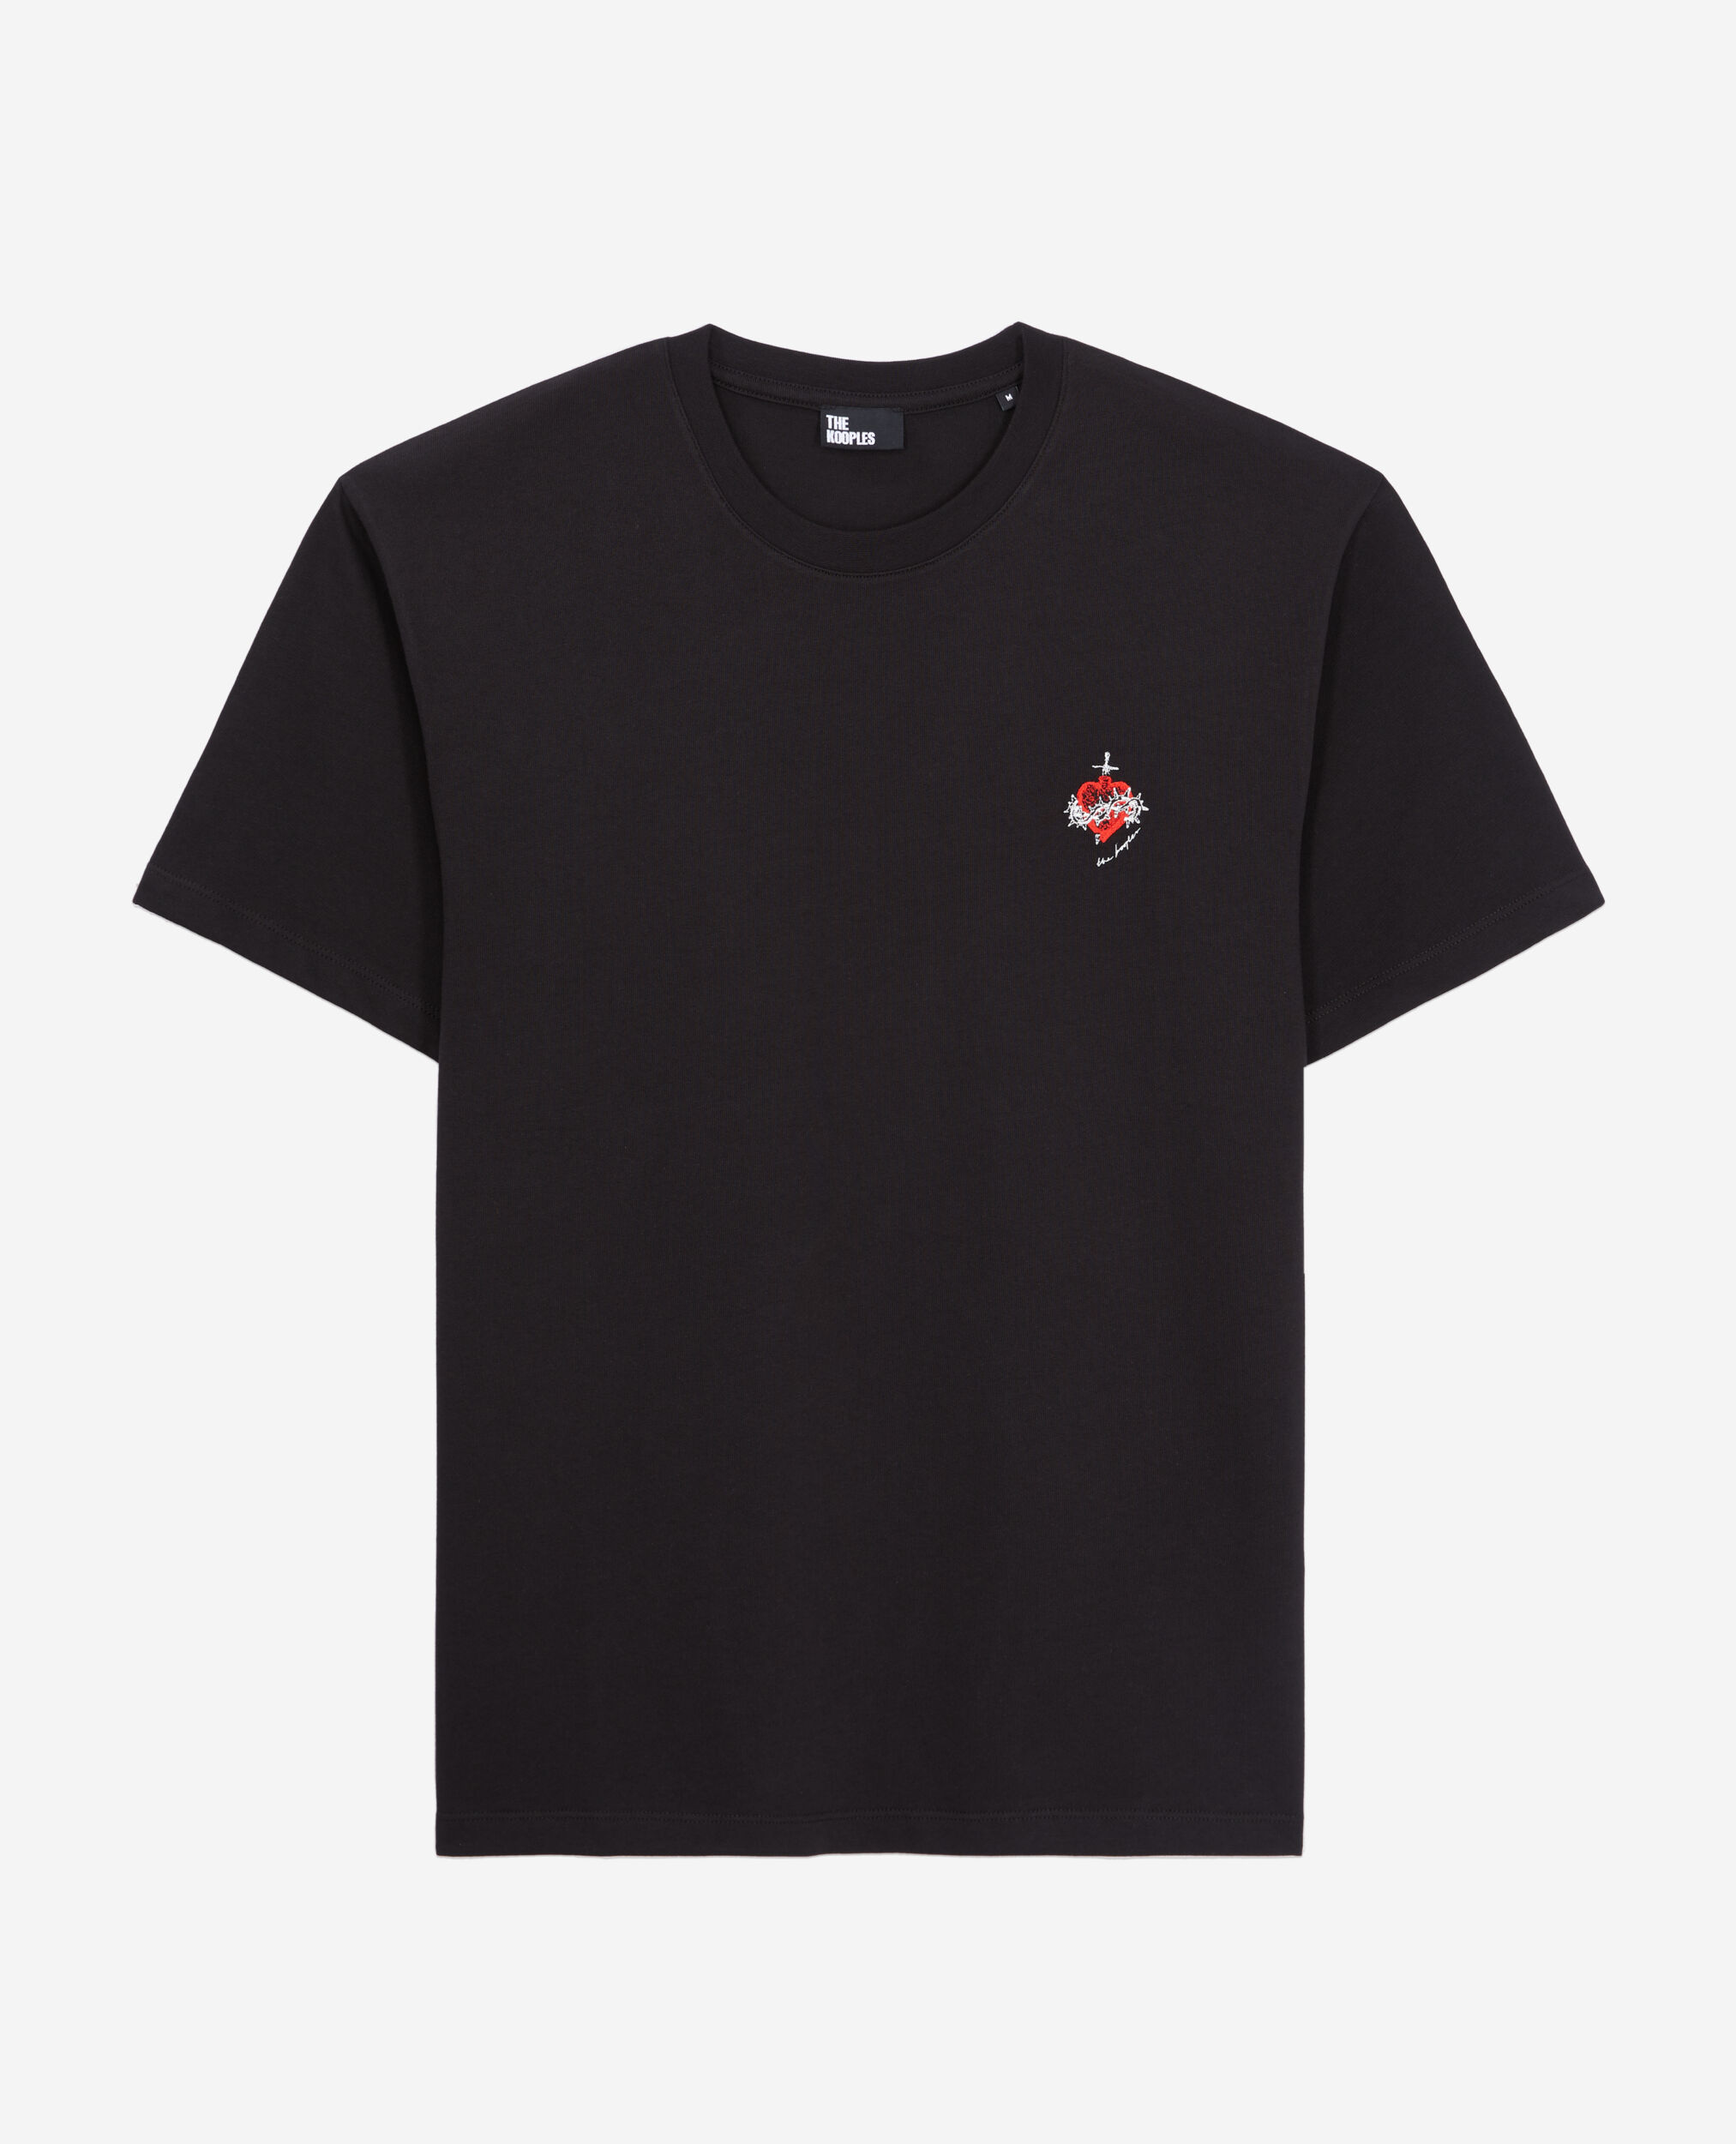 Men's black t-shirt with dagger through heart embroidery, BLACK, hi-res image number null